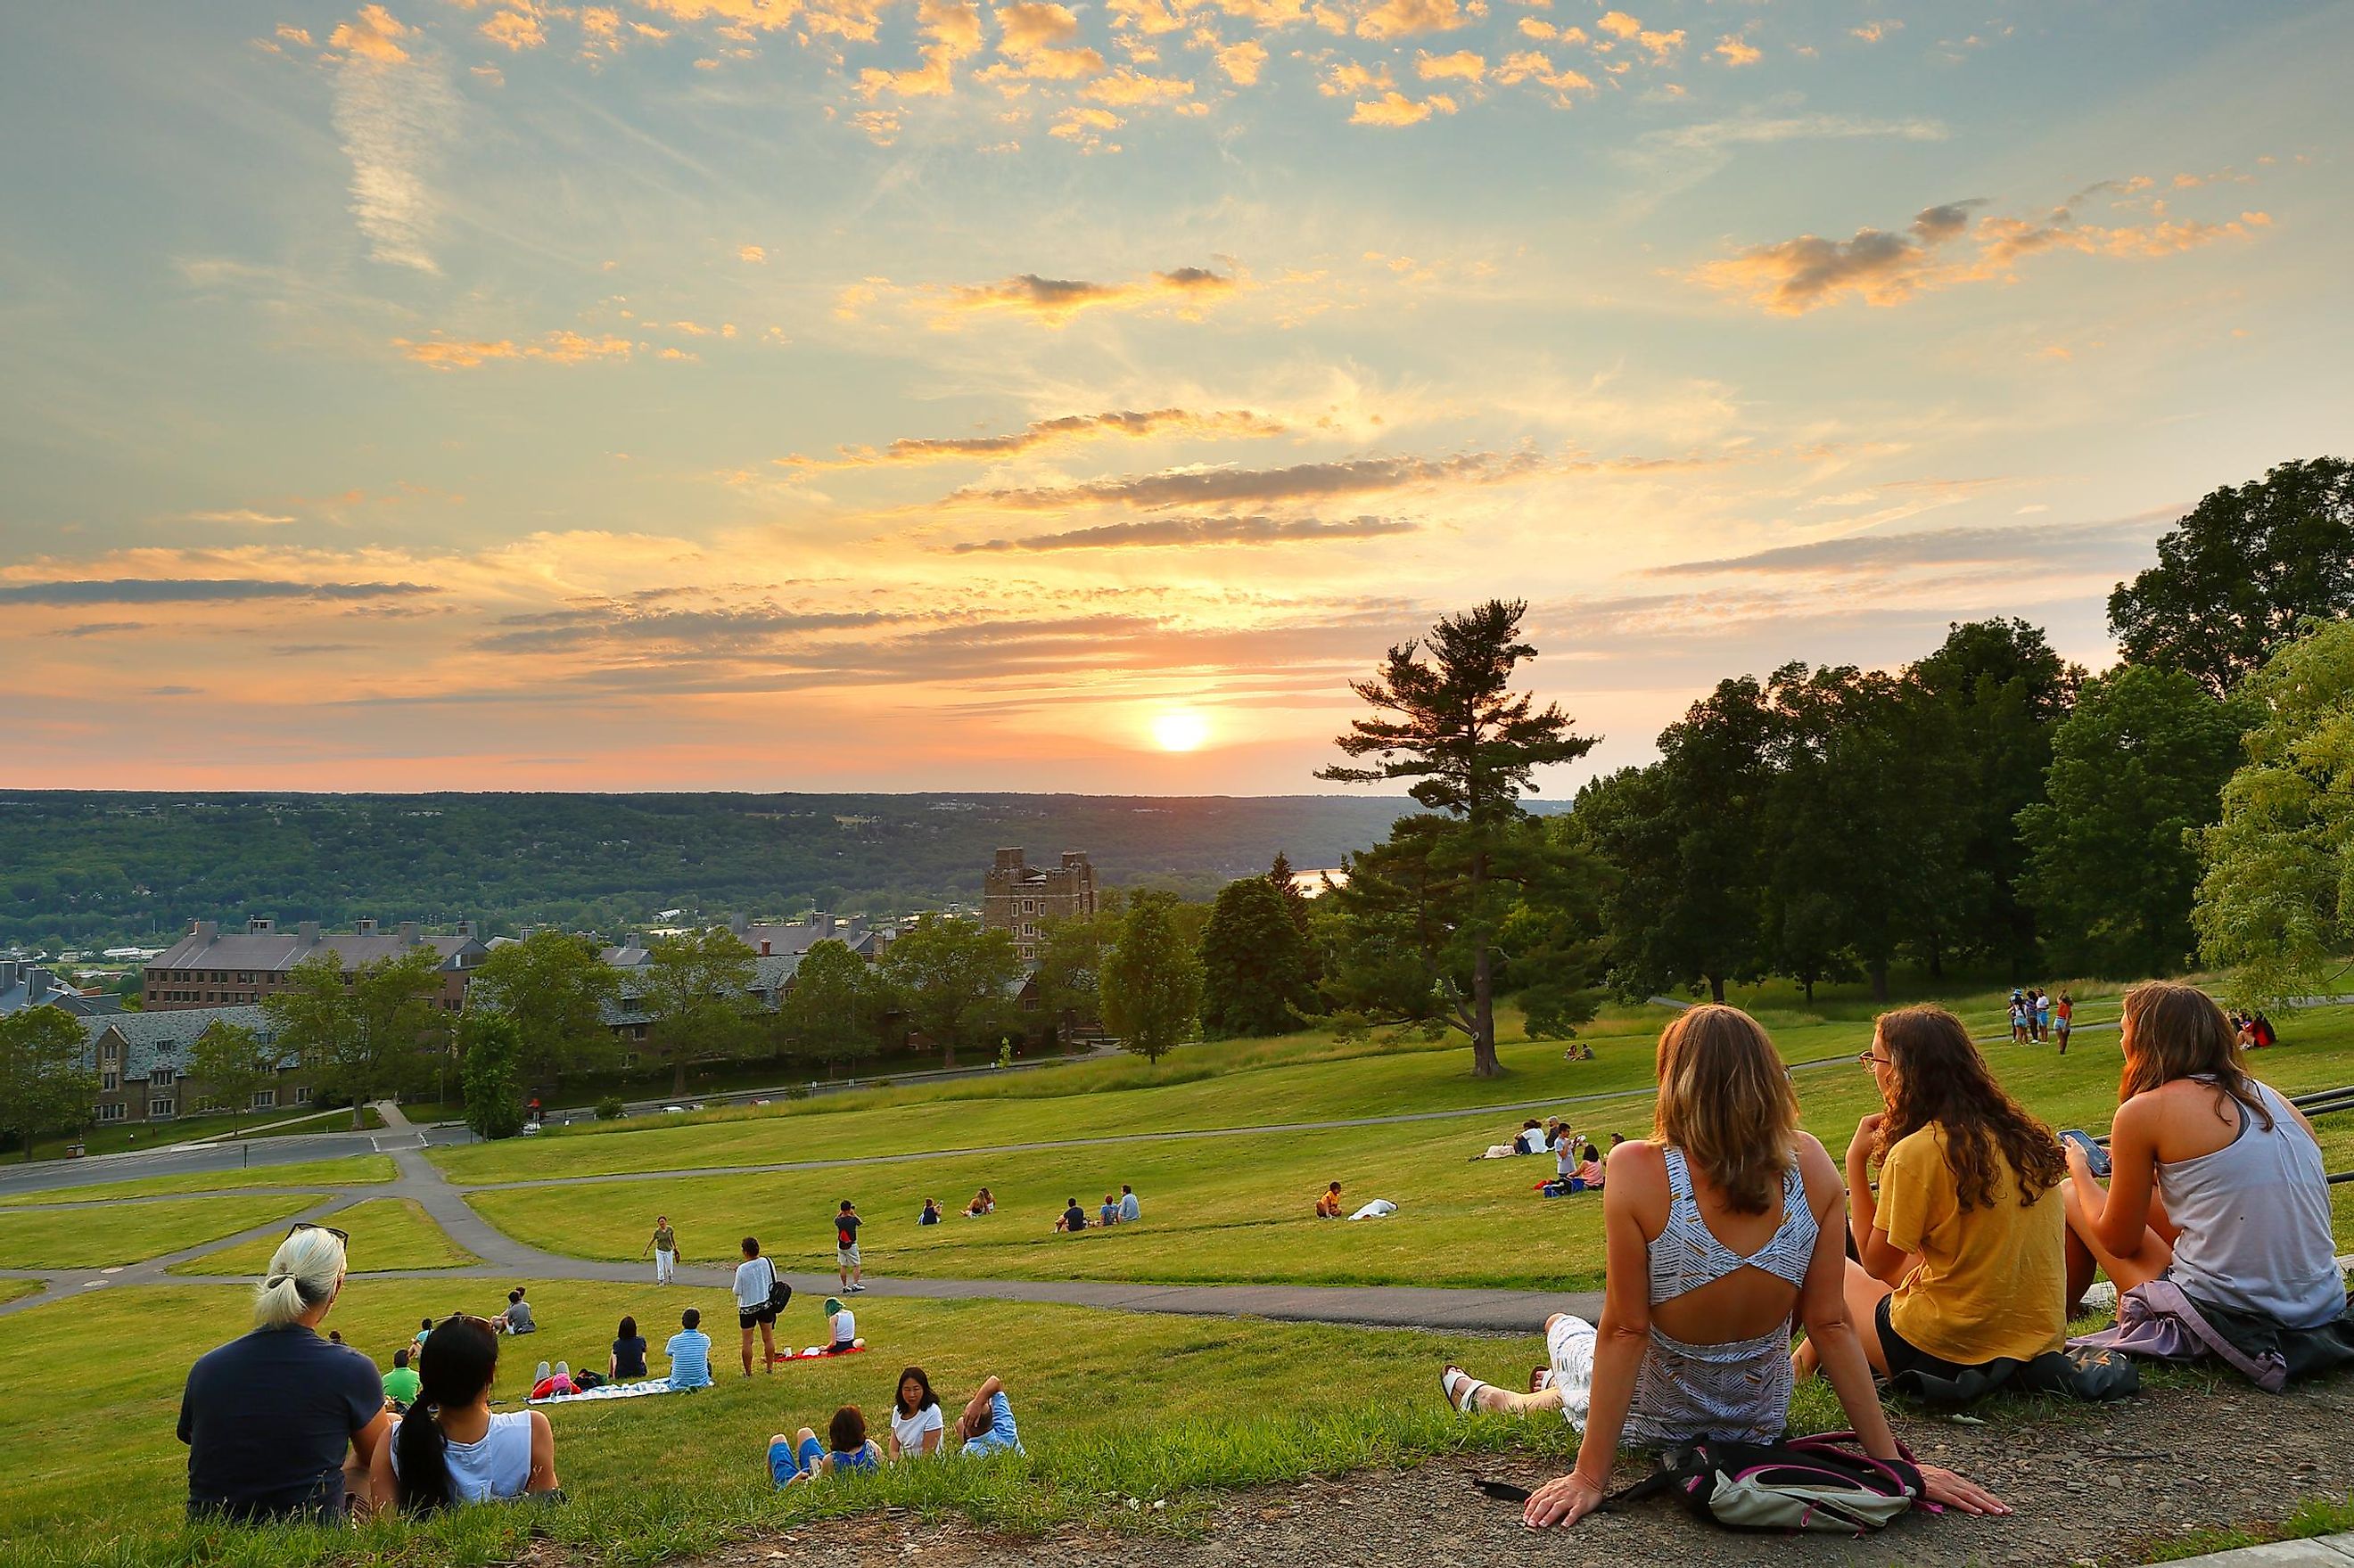 Ithaca, New York: Students watching sunset on Libe Slope at Cornell University campus. Editorial credit: Jay Yuan / Shutterstock.com